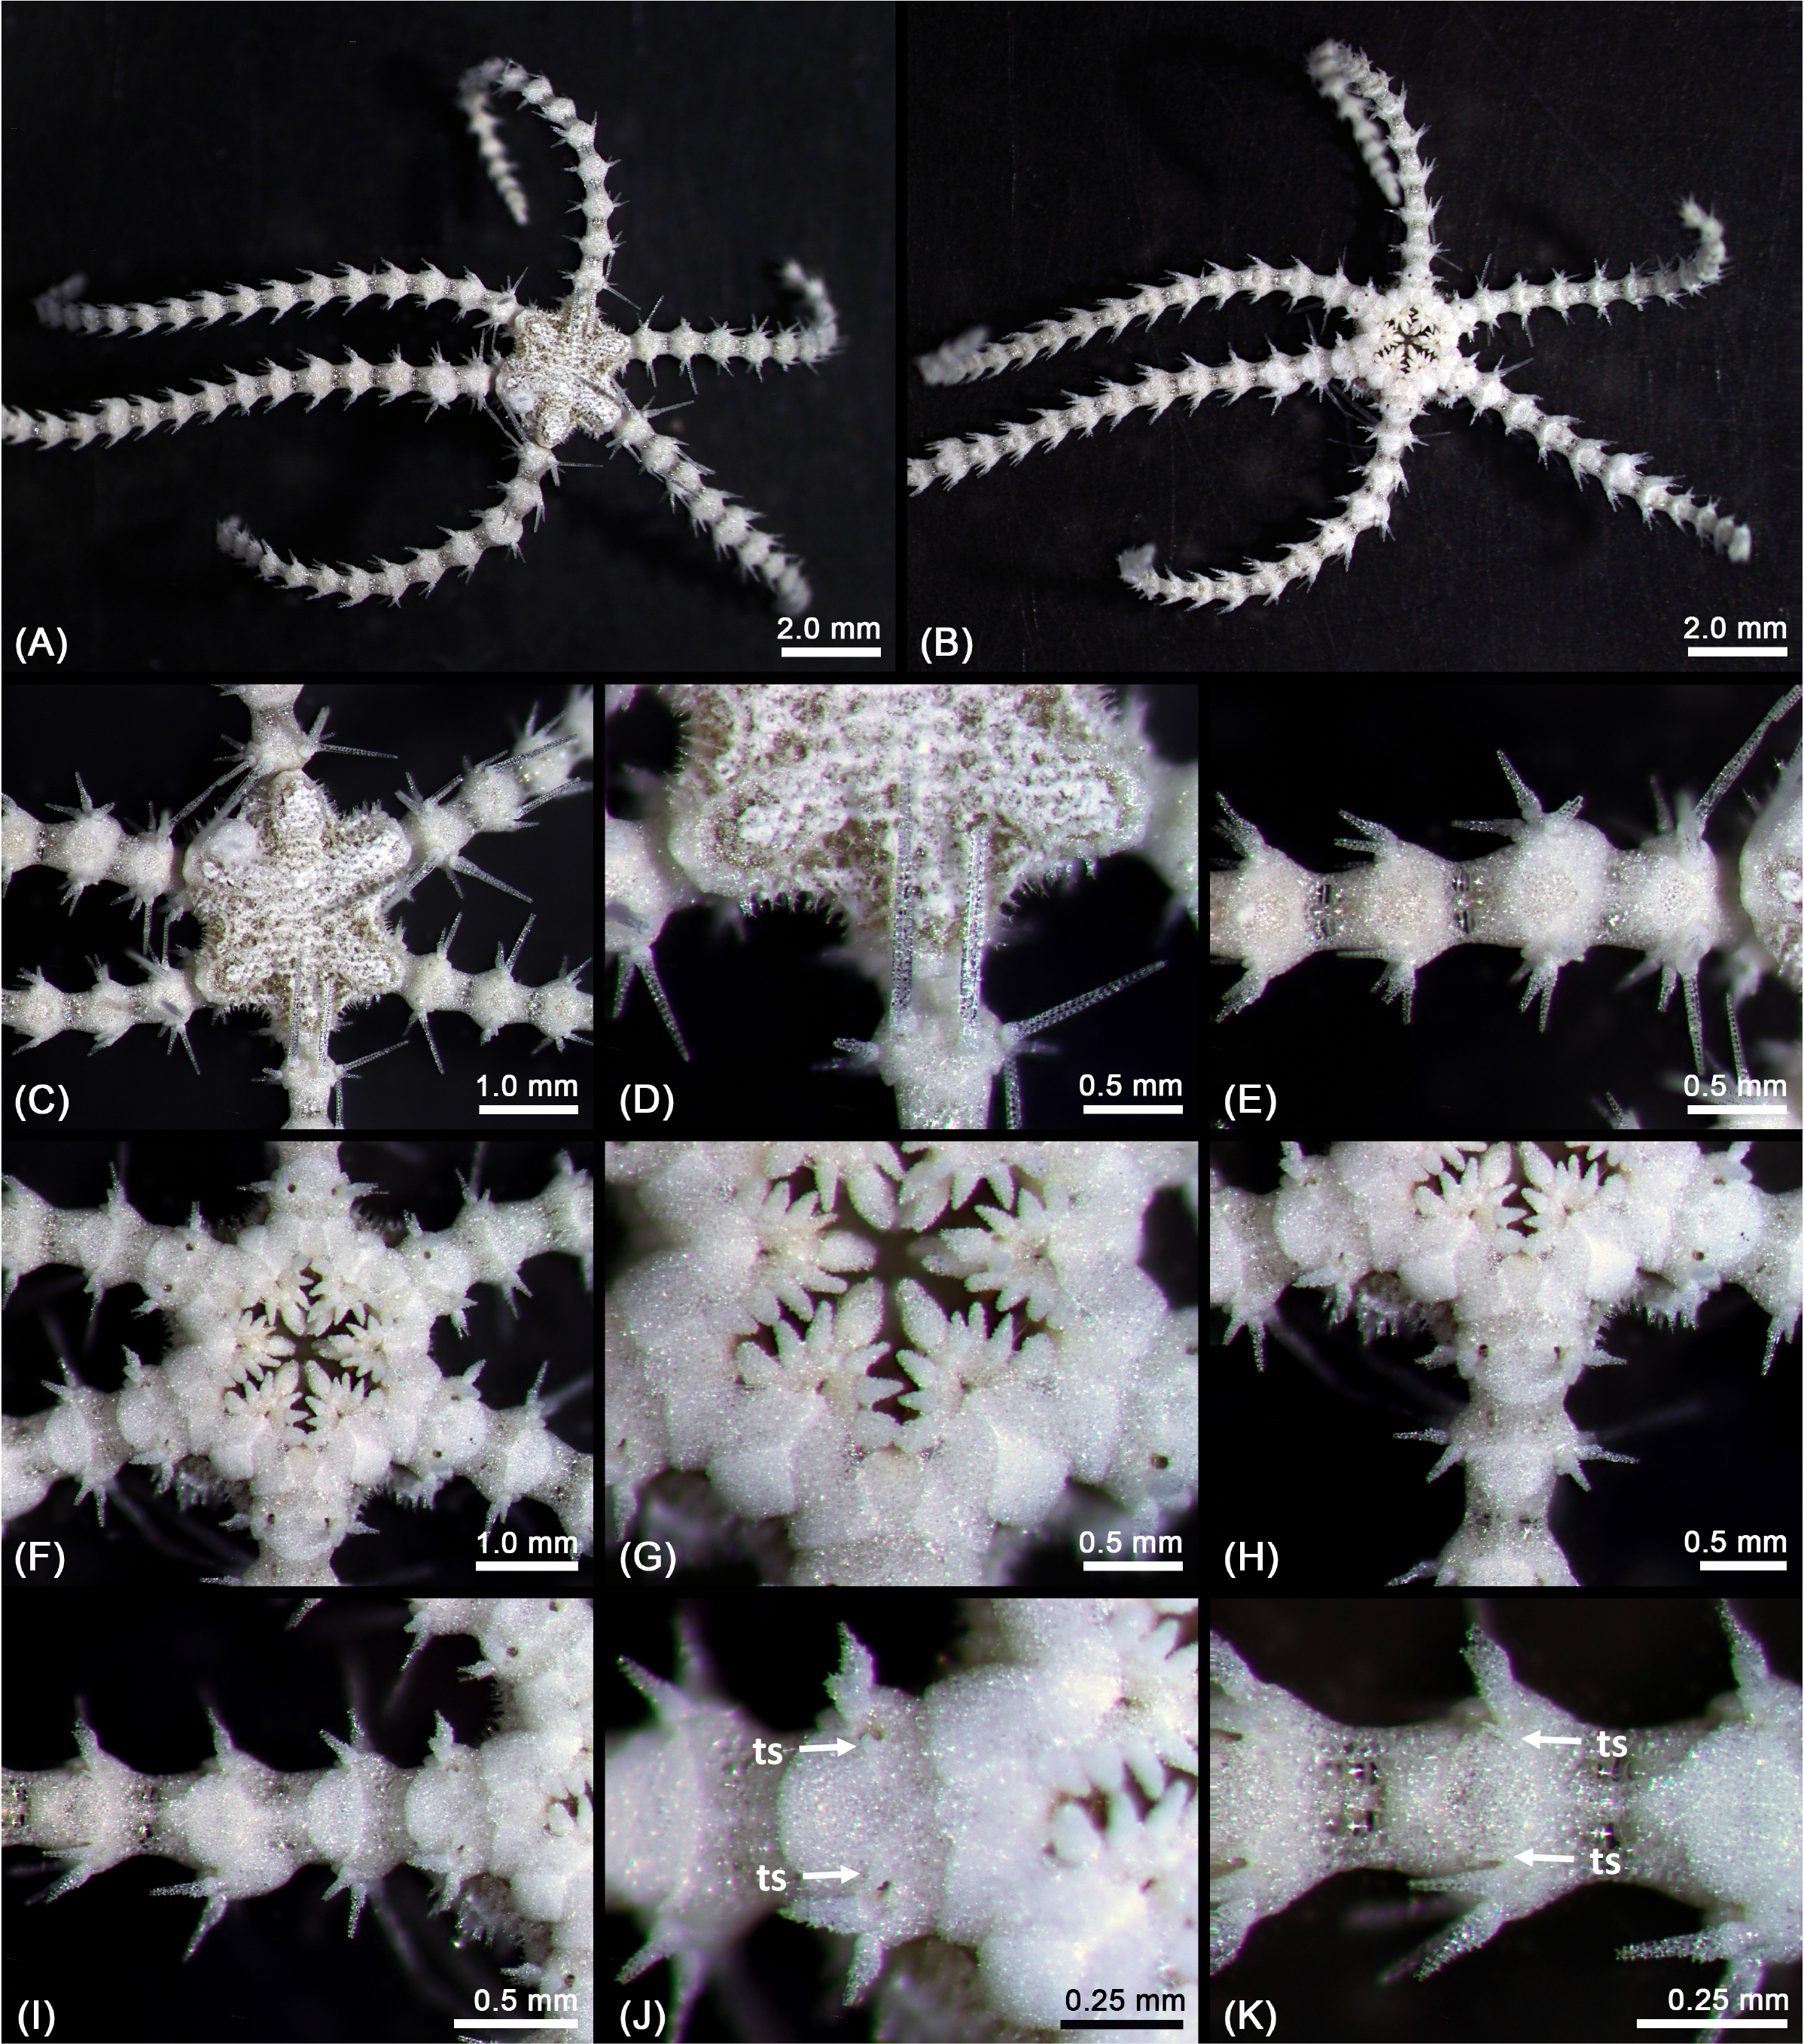 A New Fissiparous Brittle Star From Korea